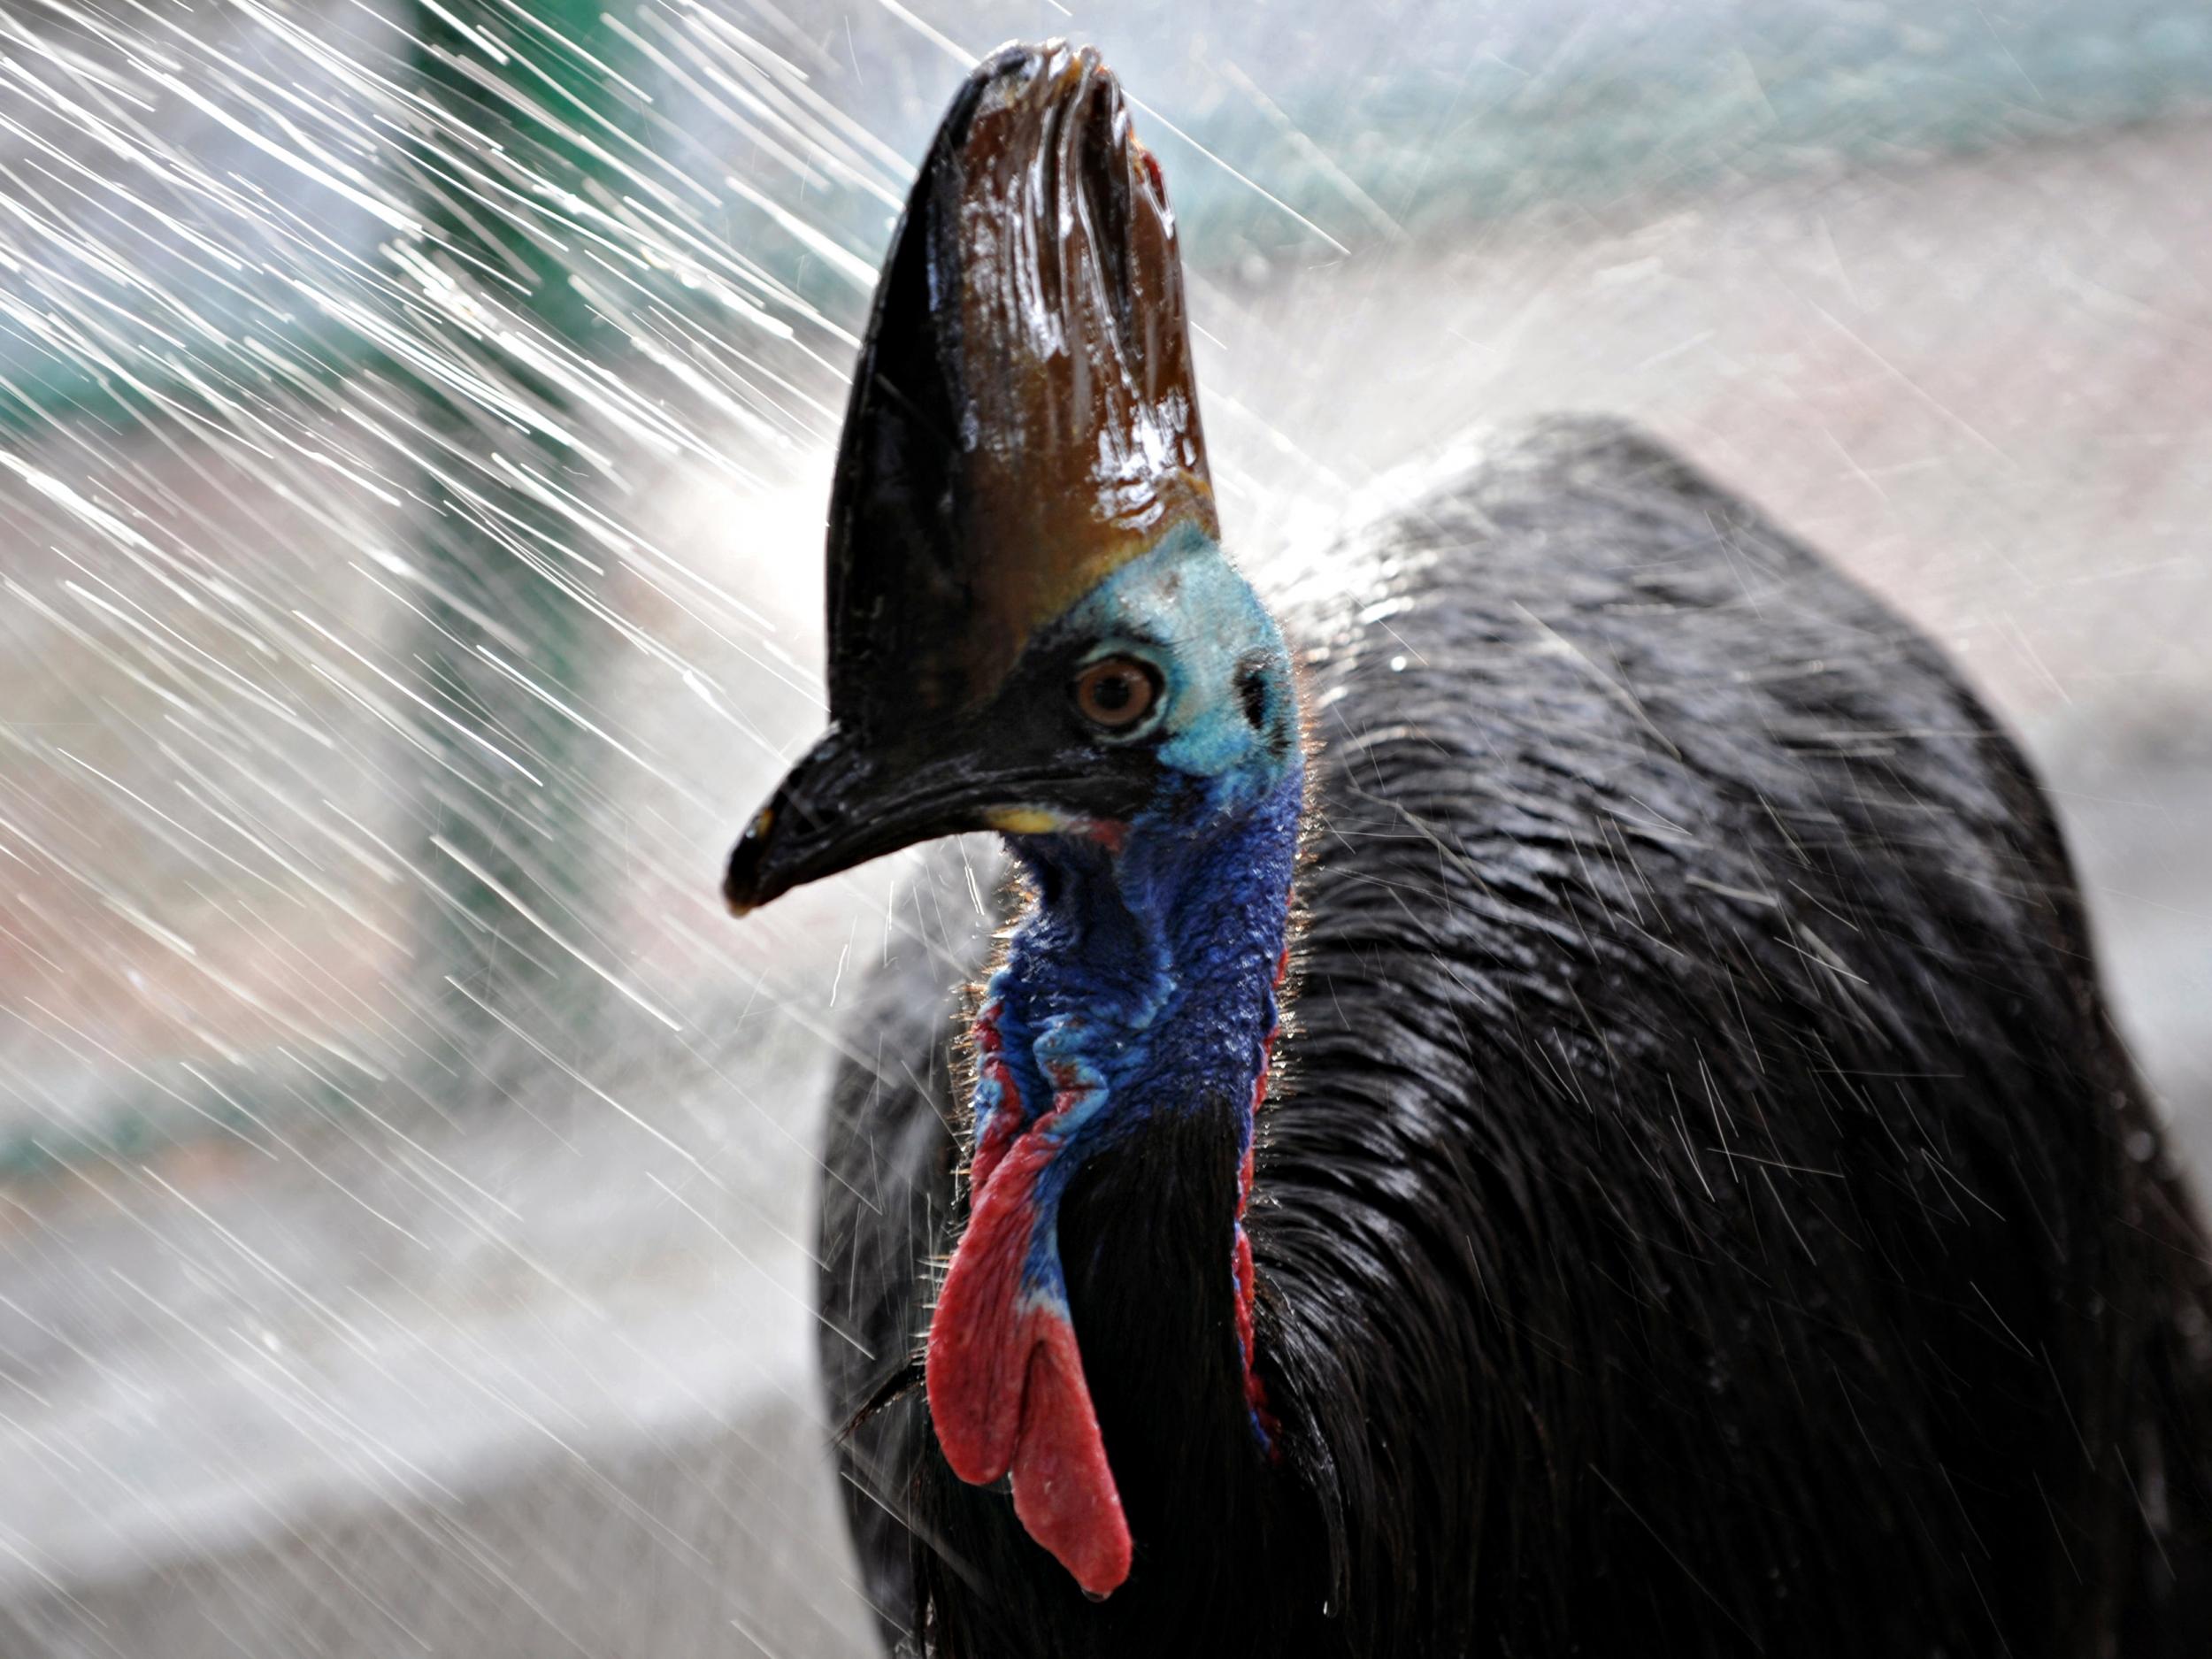 Similar to emus, cassowaries can weigh up to 6kg and reach 6ft in height